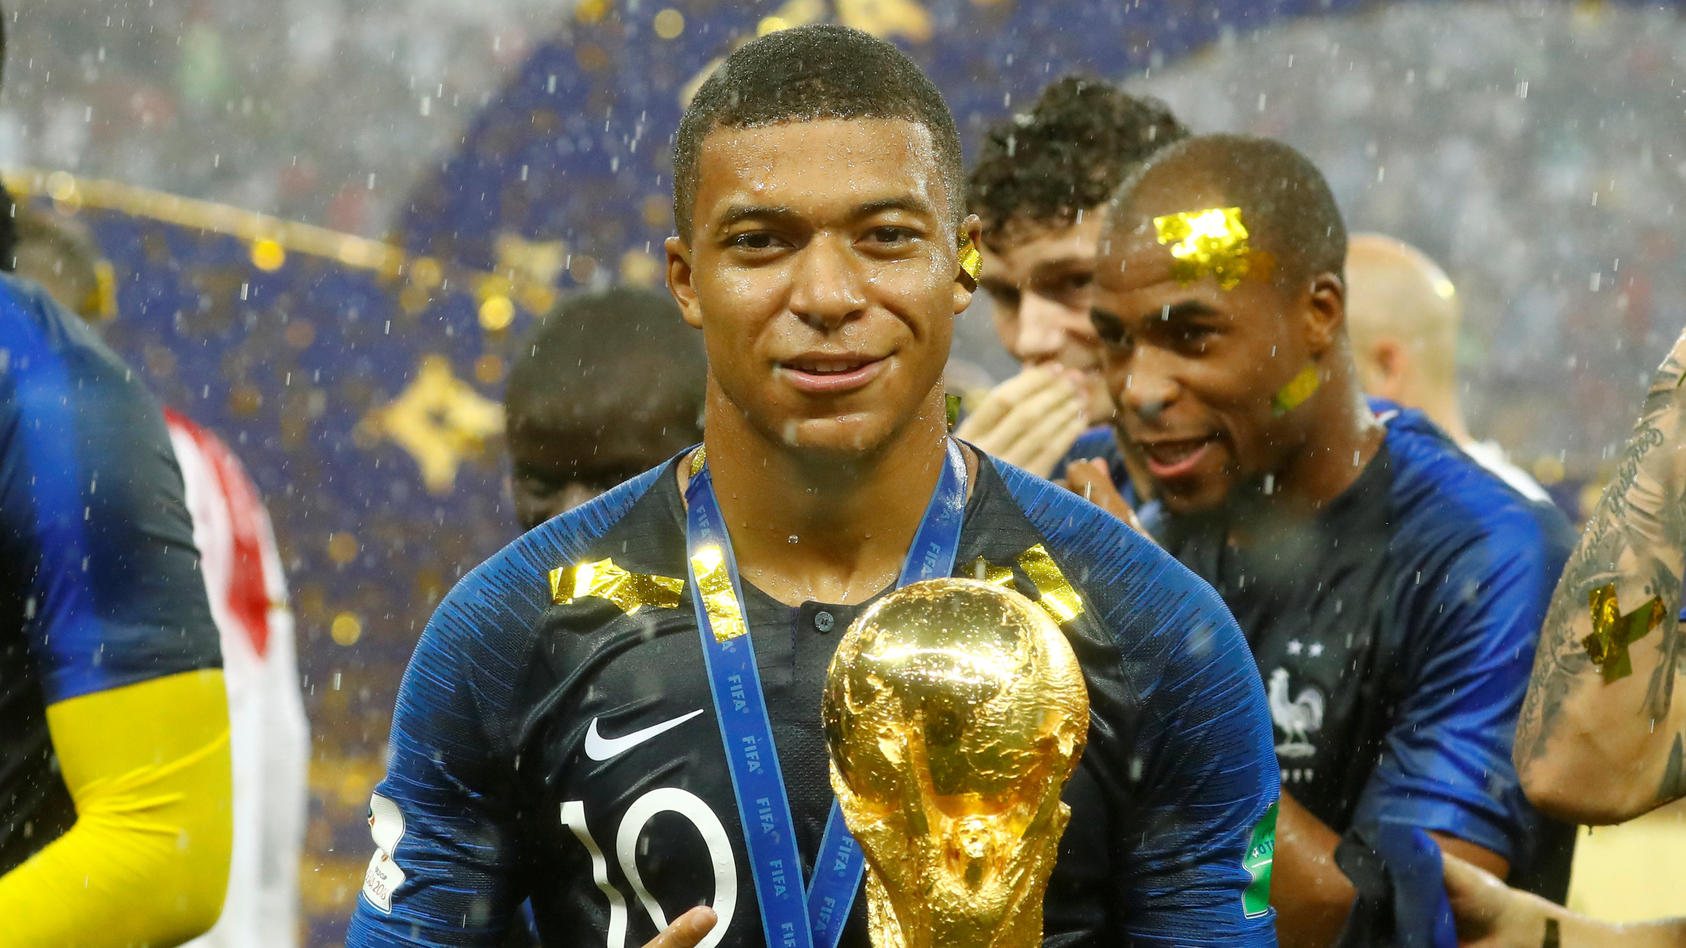 Soccer Football - World Cup - Final - France v Croatia - Luzhniki Stadium, Moscow, Russia - July 15, 2018  France's Kylian Mbappe celebrates with the trophy after winning the World Cup  REUTERS/Kai Pfaffenbach